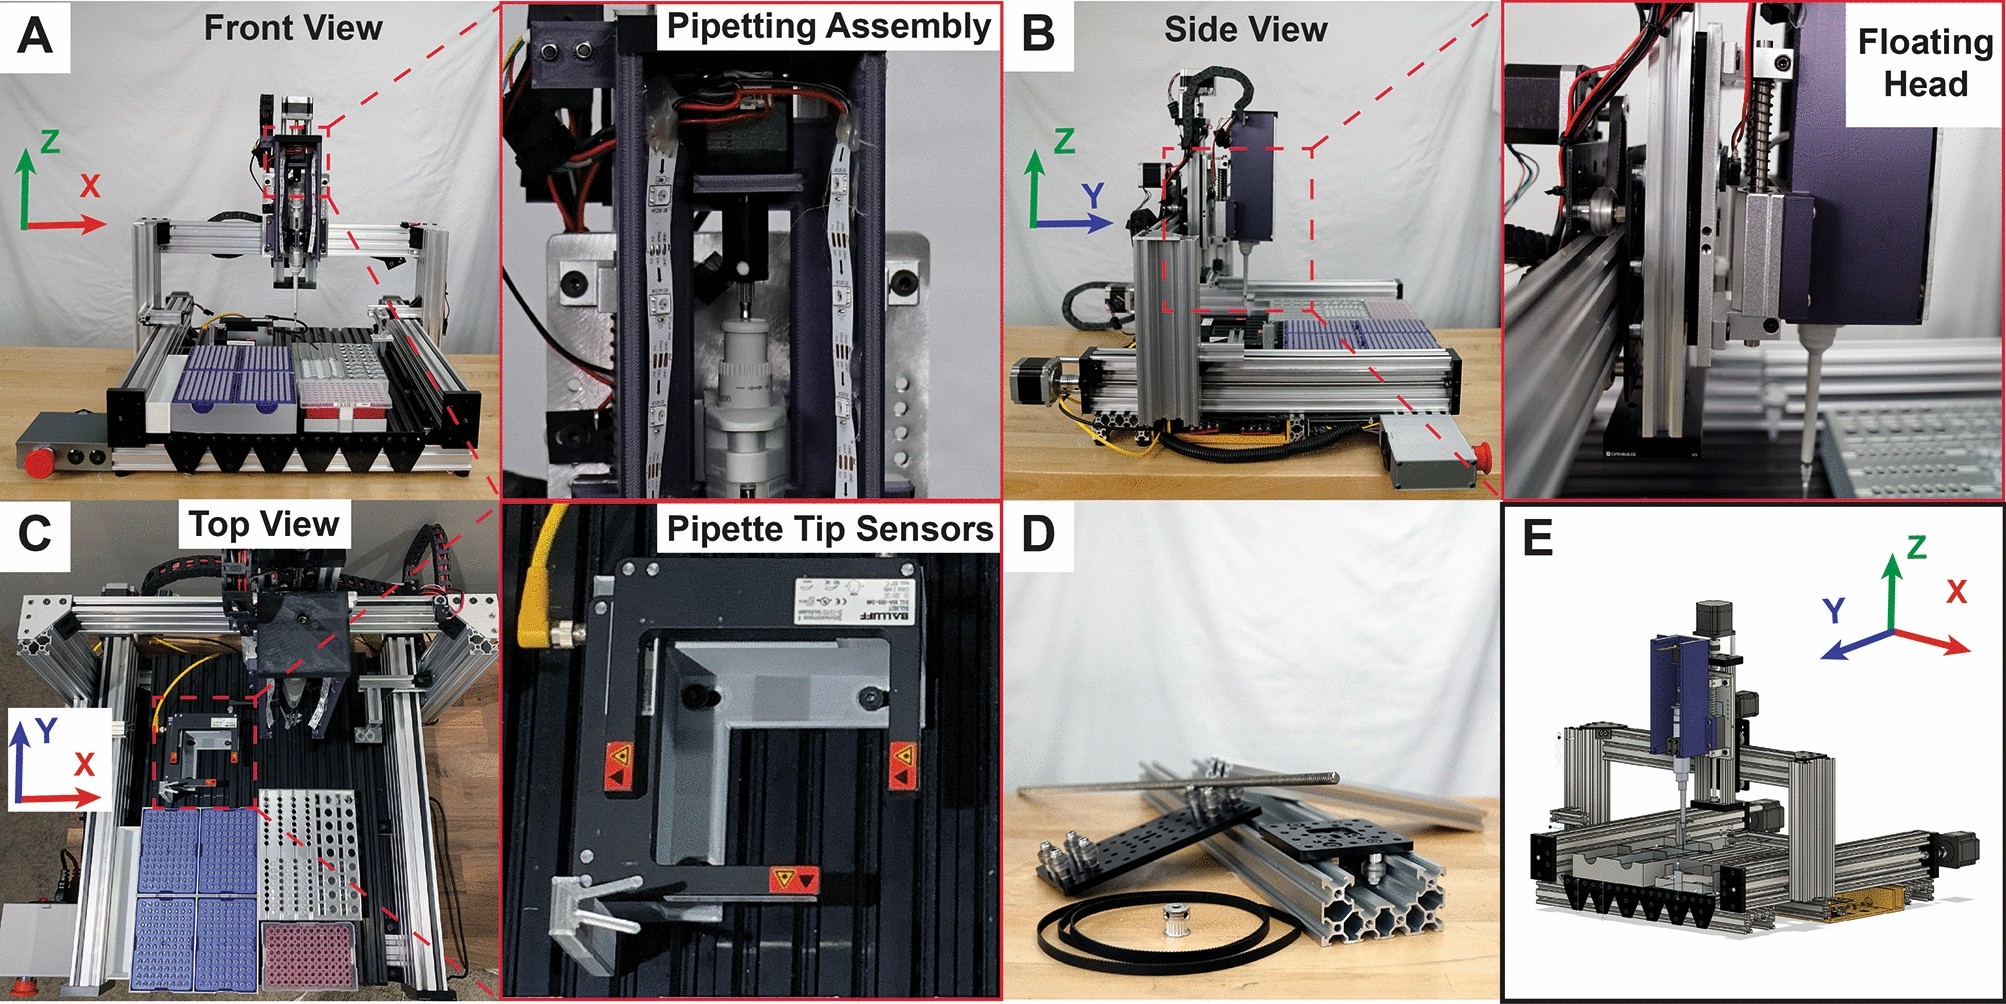 Principles computer-controlled linear motion applied to open-source affordable liquid handler for automated micropipetting | Scientific Reports